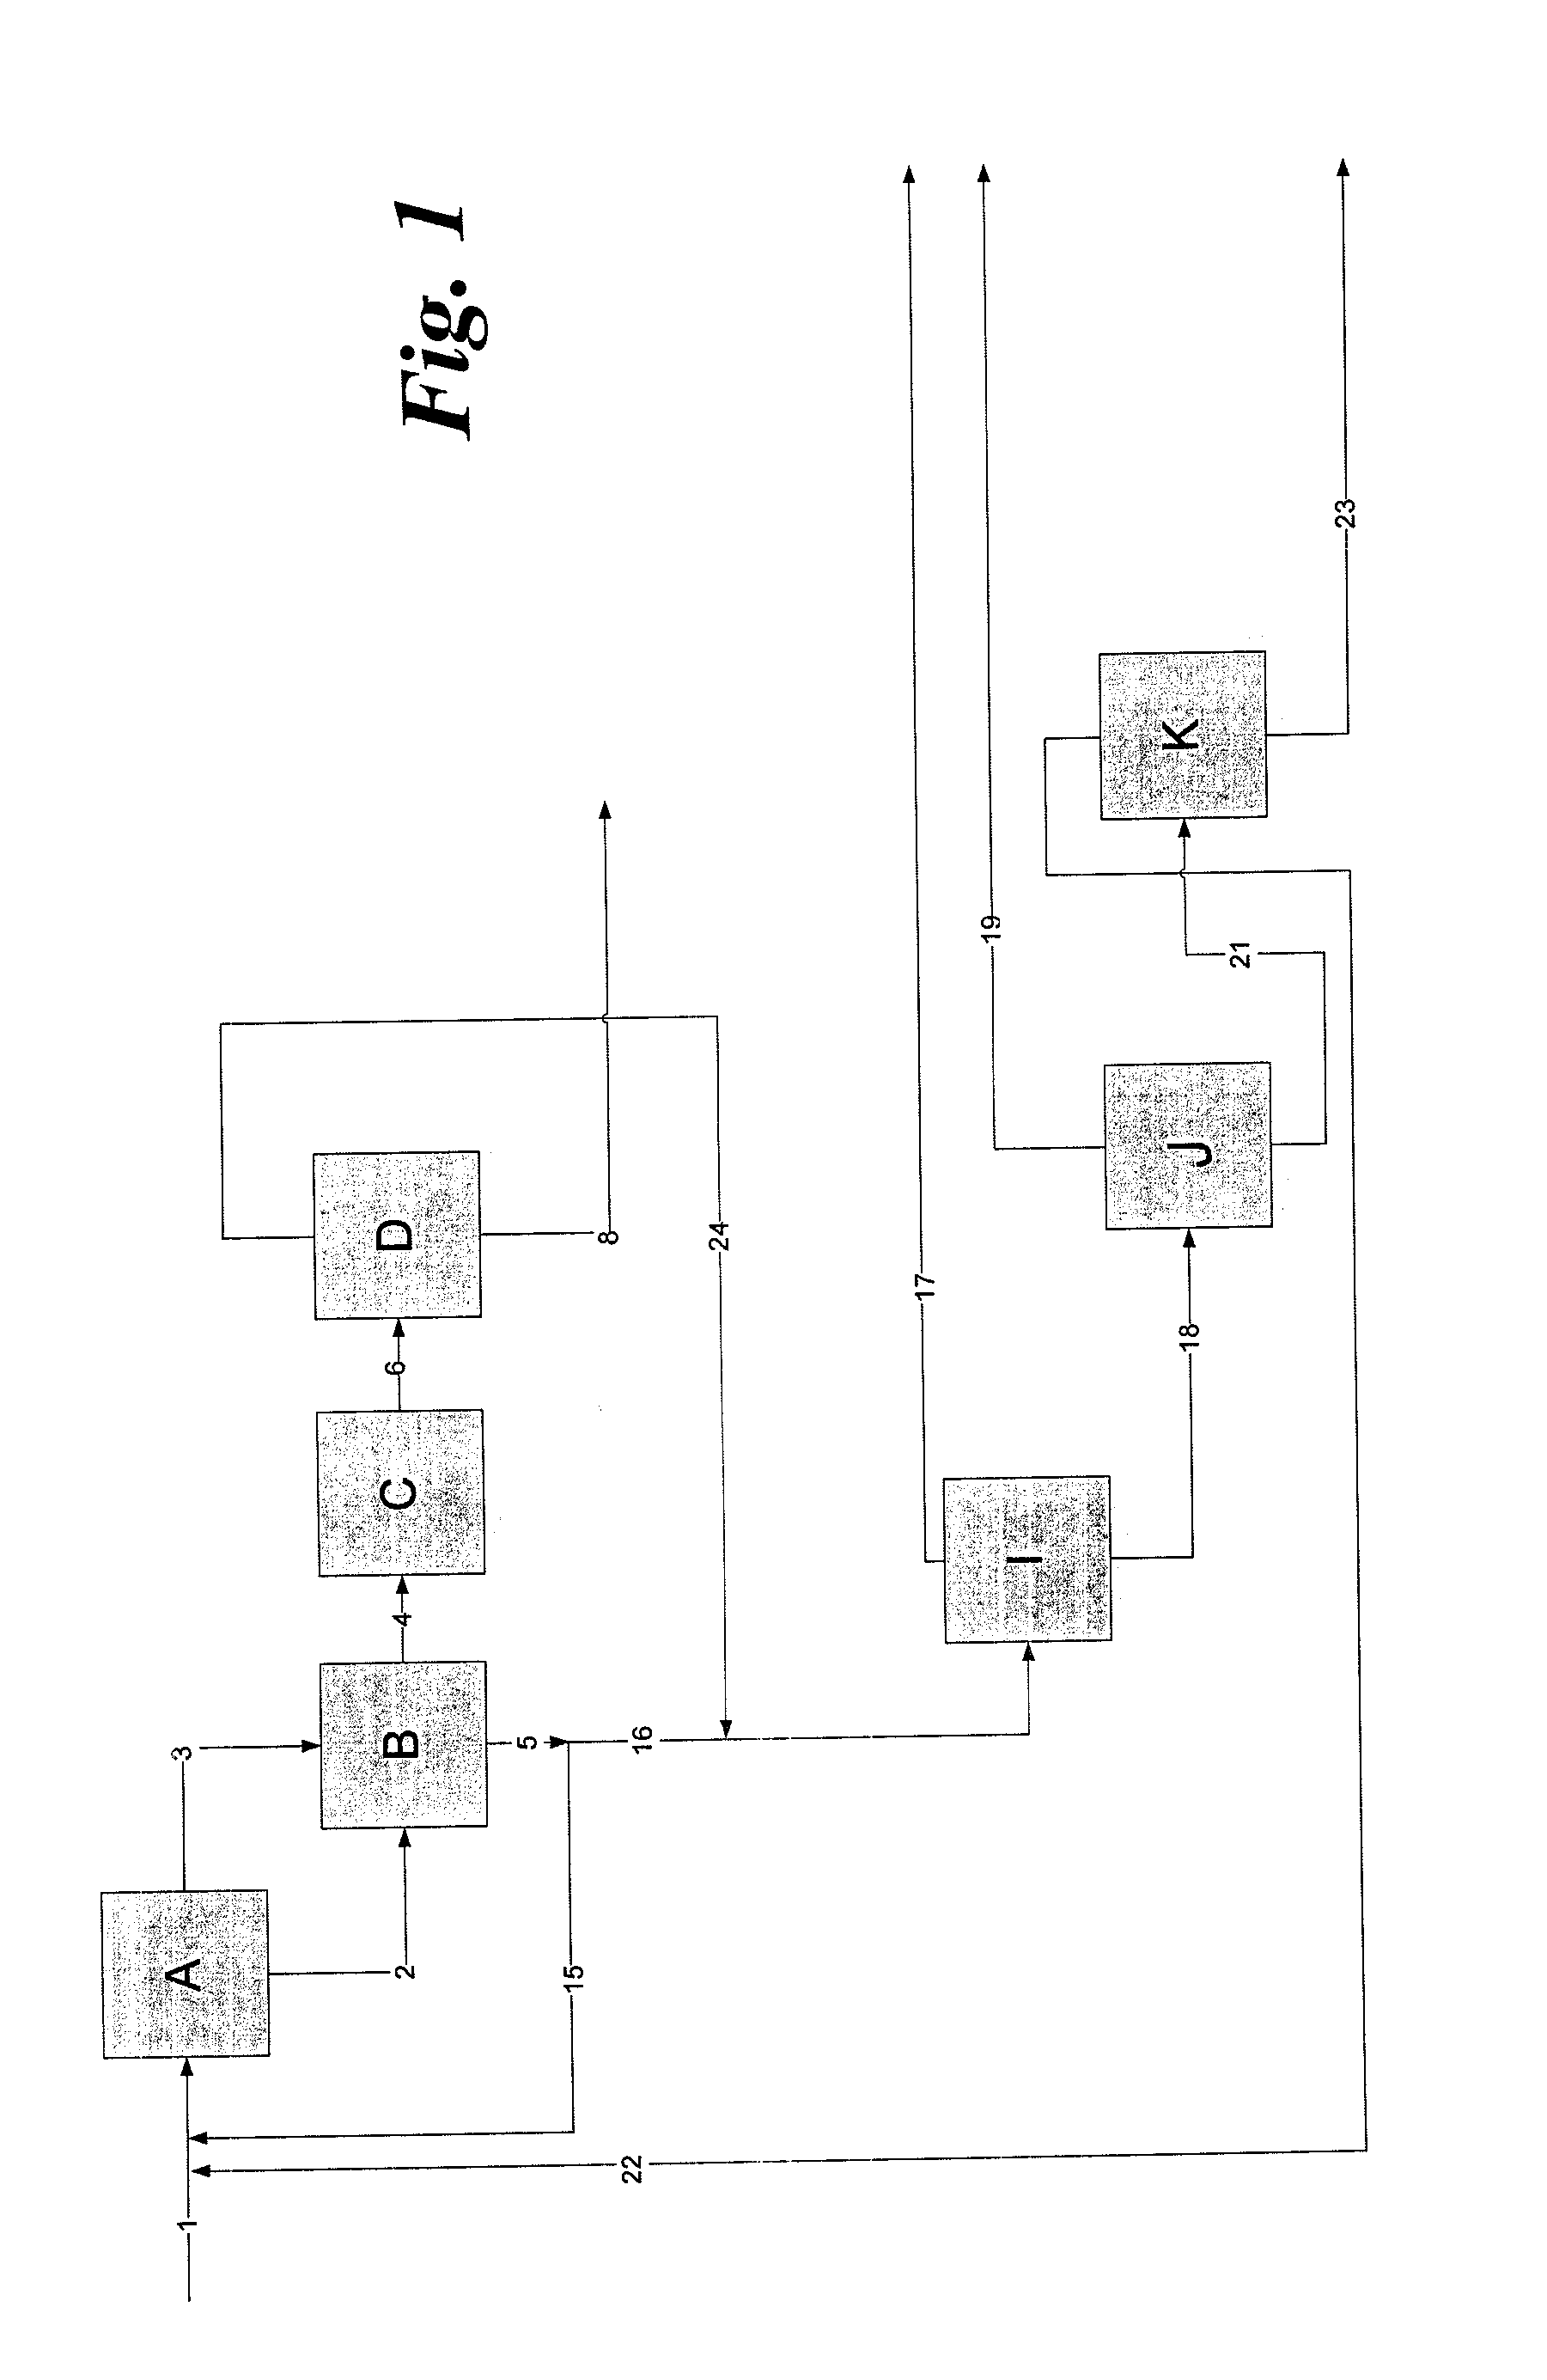 Method for isolation of laurolactam from a laurolactam synthesis process stream